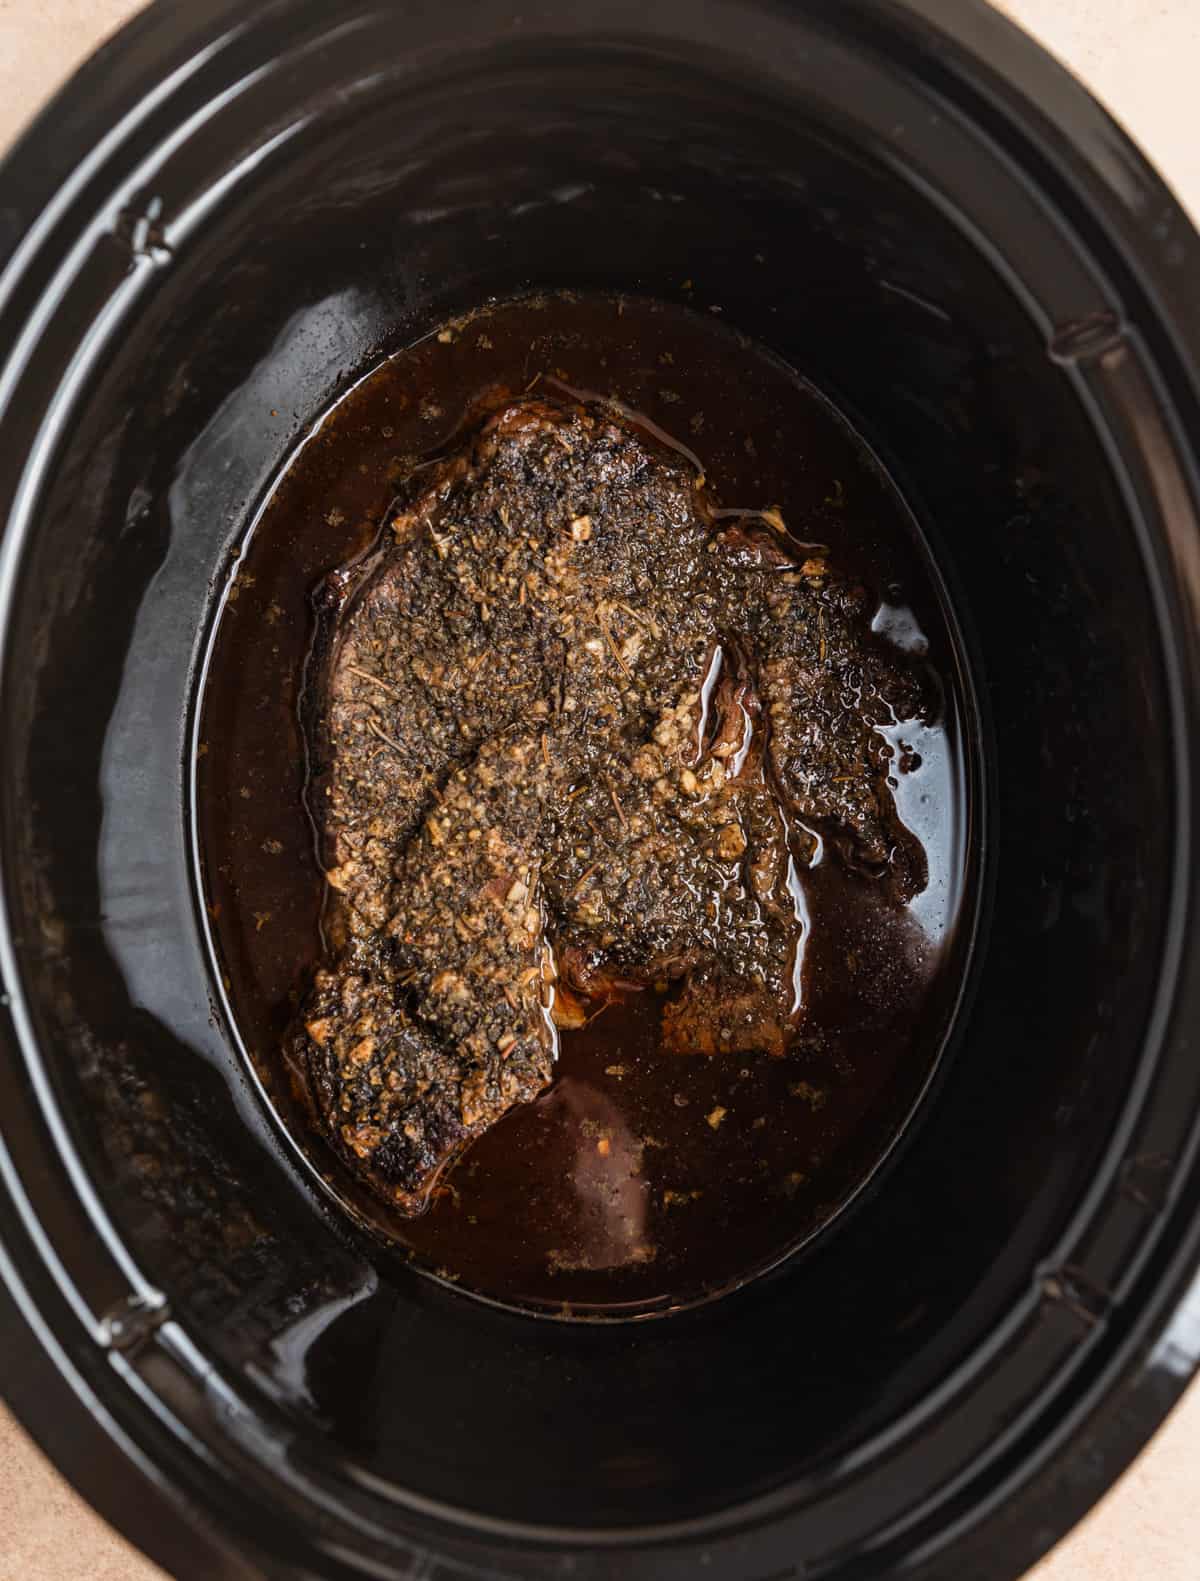 Overhead view of cooked chuck roast in juices in slow cooker.